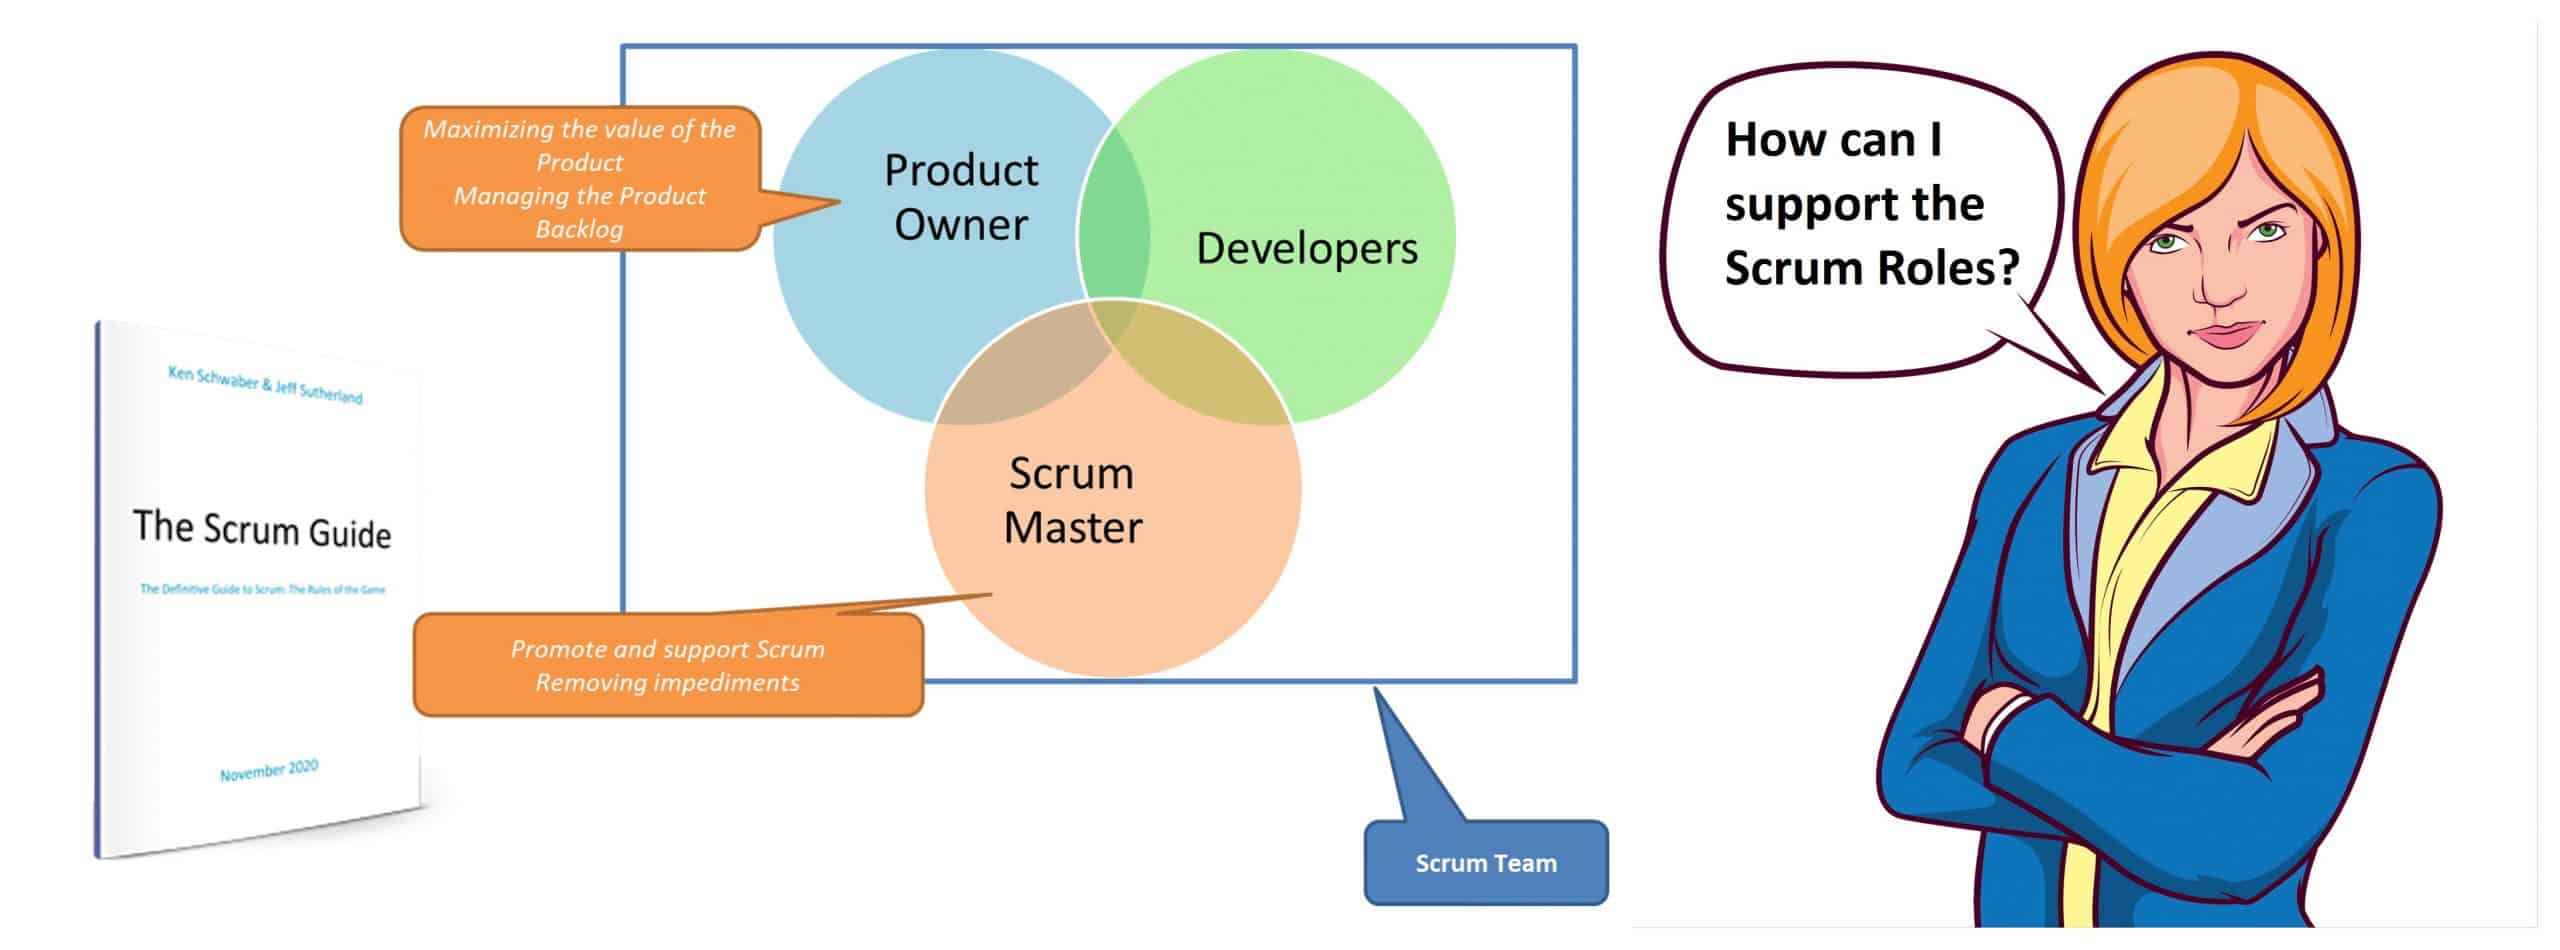 As a Leader How do I support the Scrum Roles?